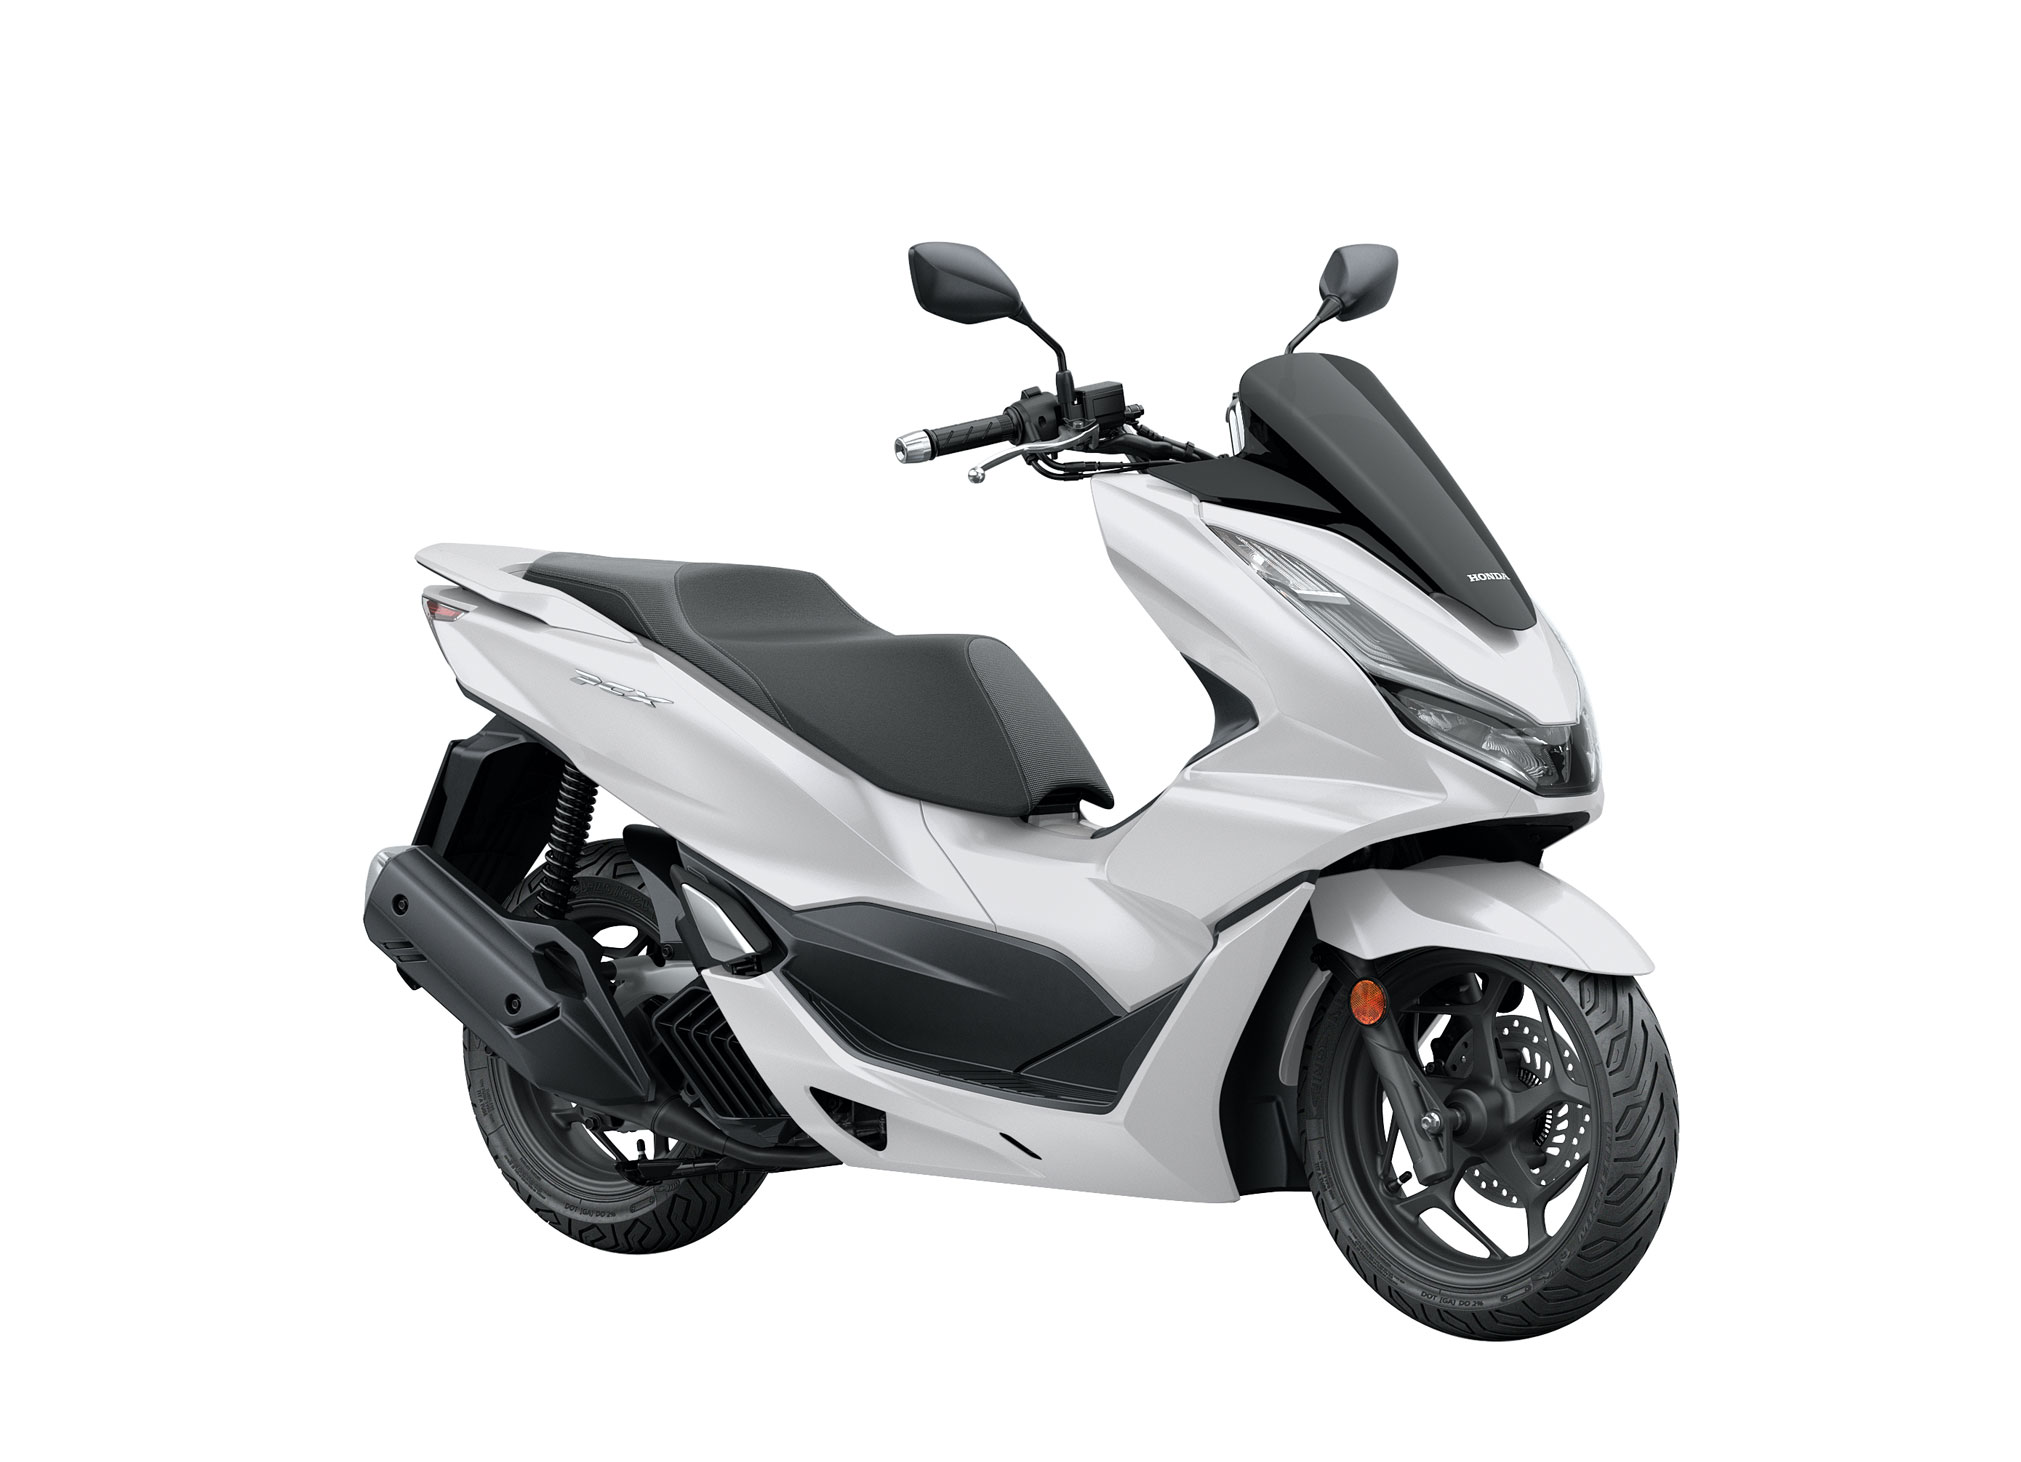 2021 Honda PCX150 ABS Guide • Total Motorcycle